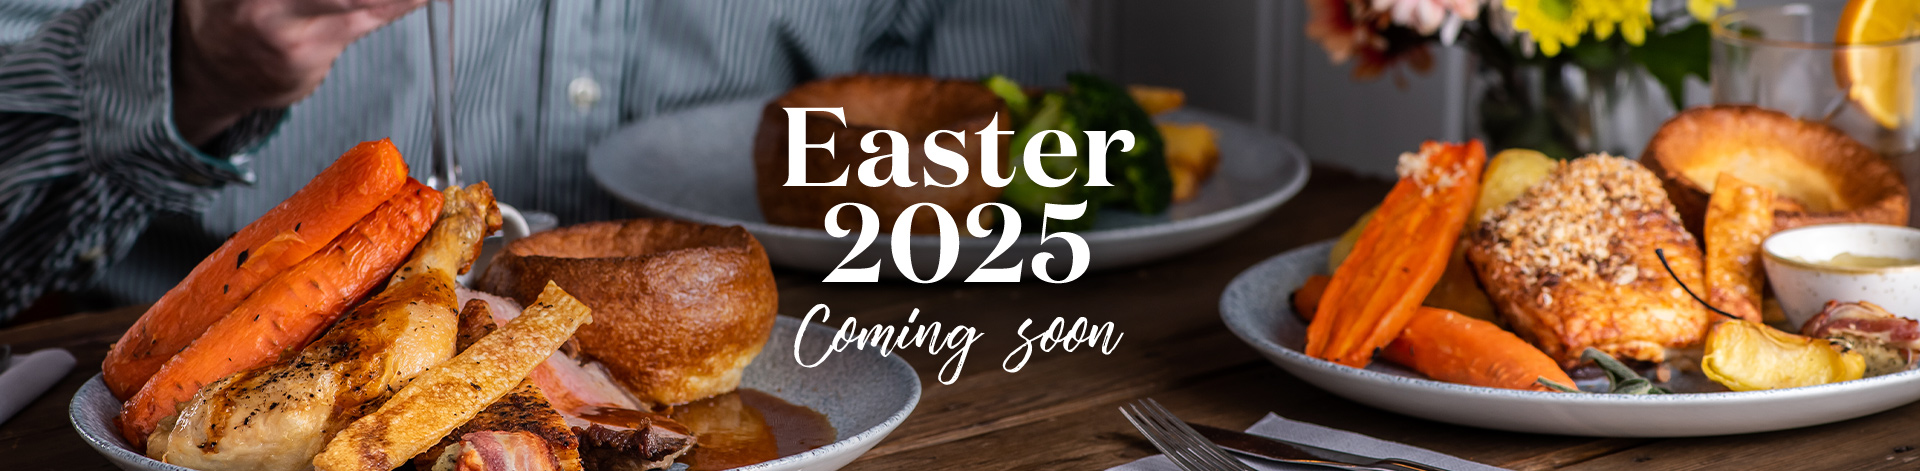 Easter at The Packe Arms in Loughborough